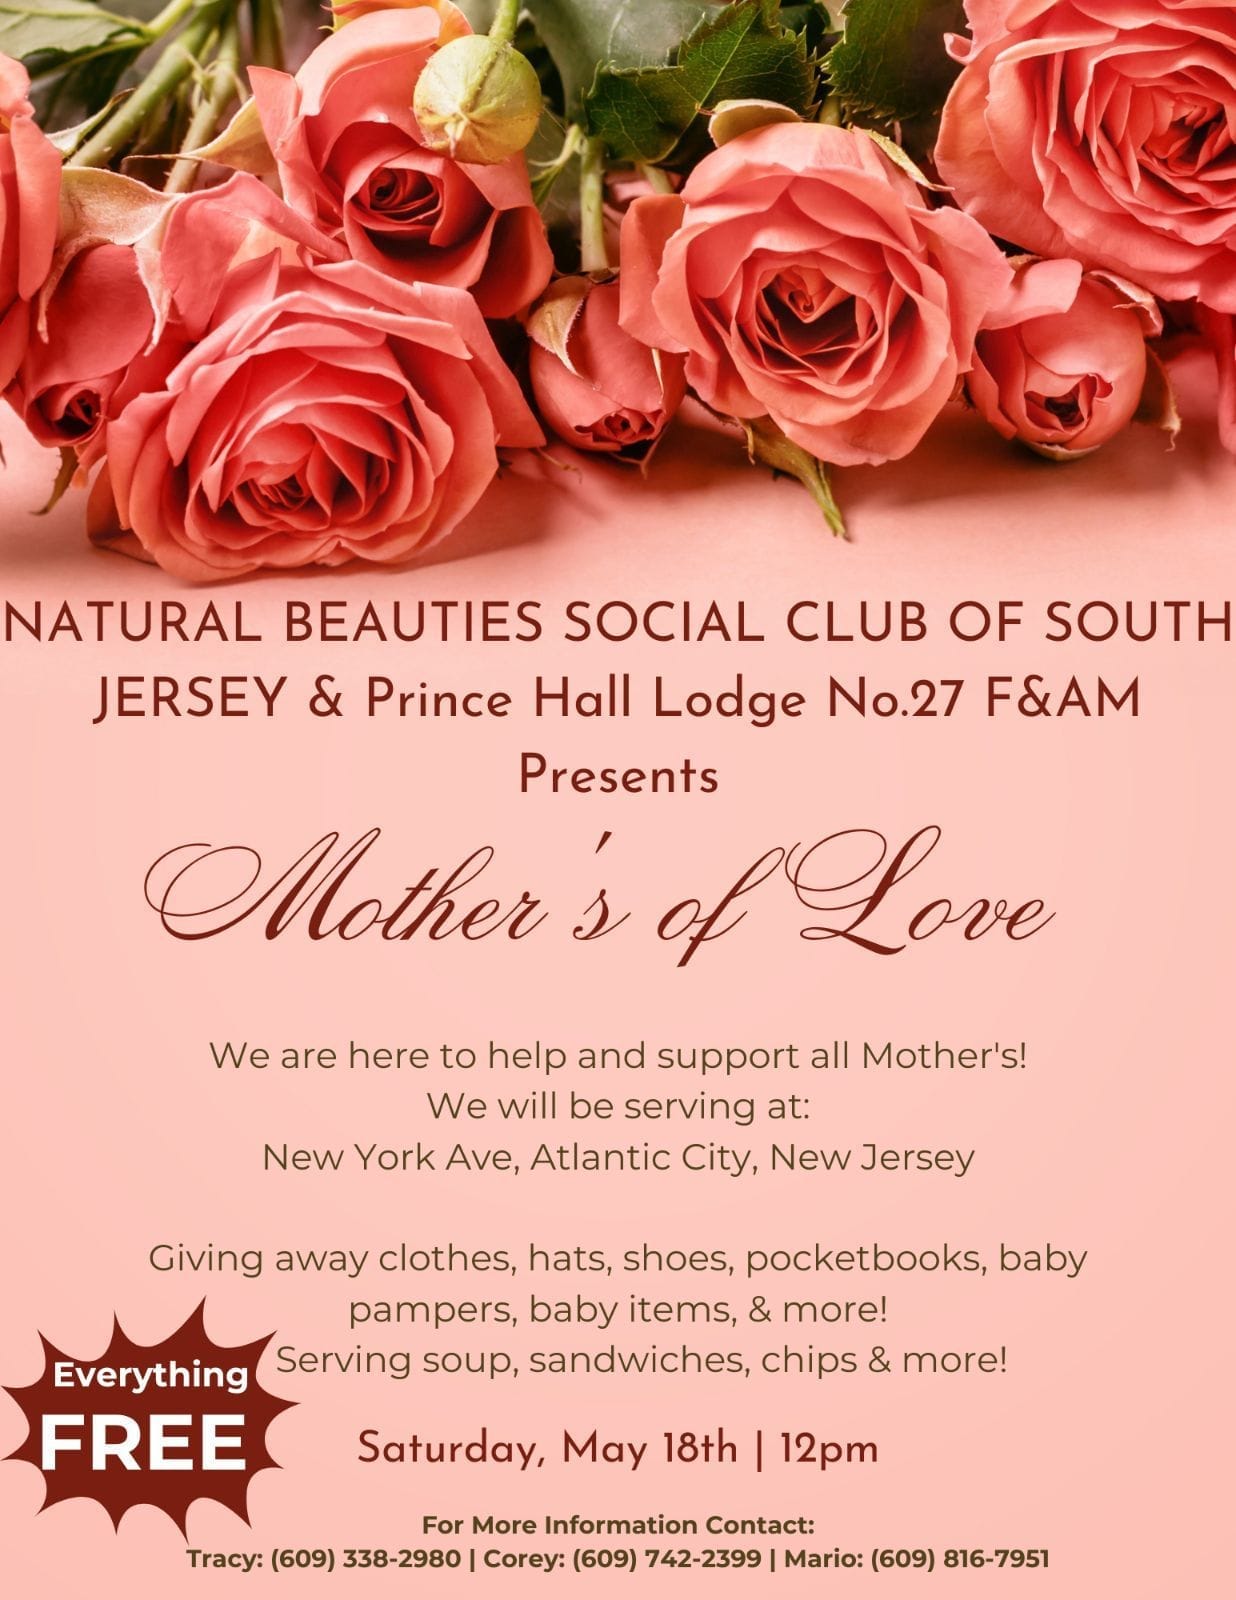 Community Focus: Prince Hall  Lodge 27 and the Natural Beauties Social Club Help the Community by Distributing Clothes and Food